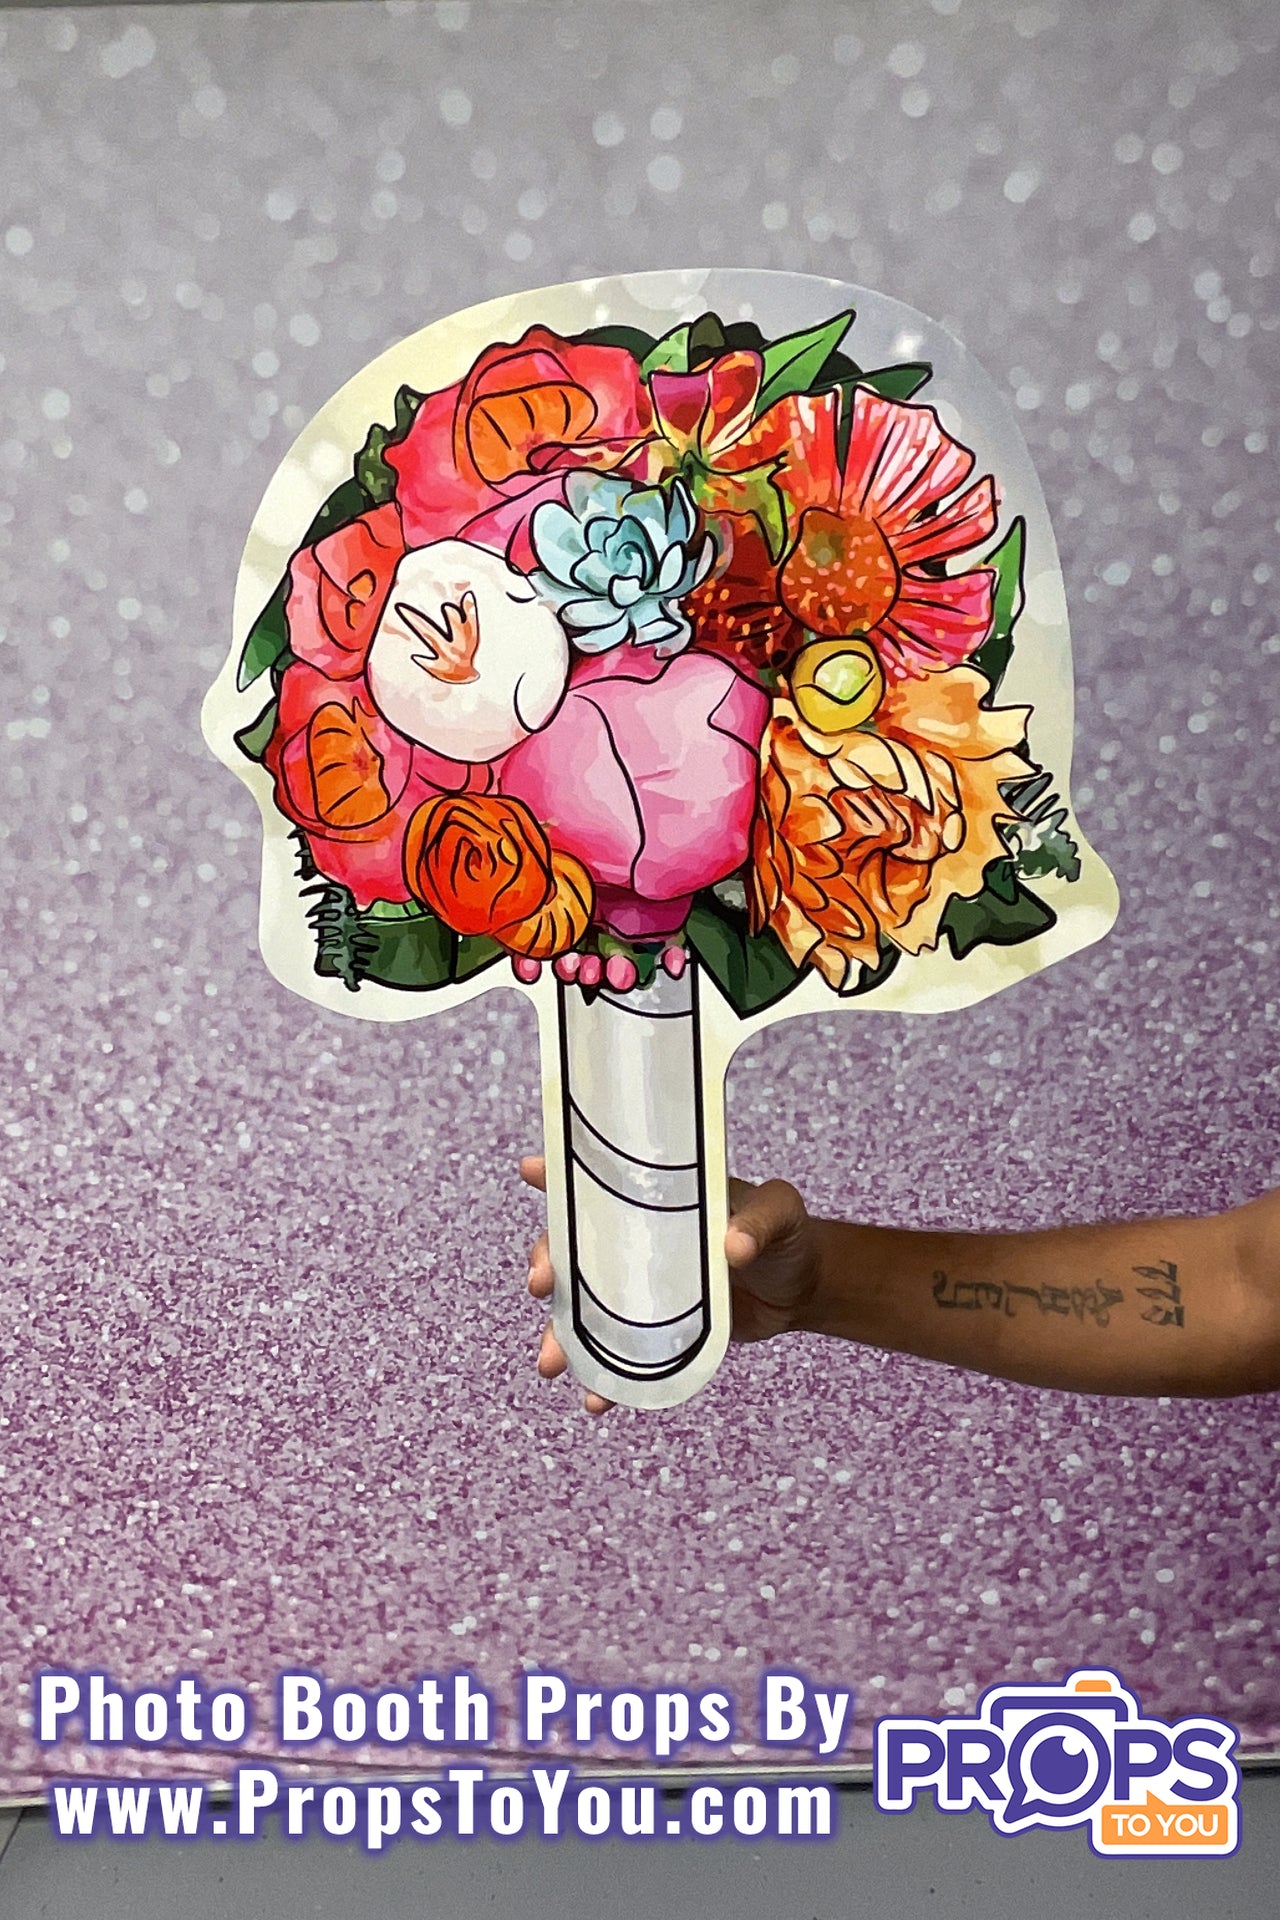 HUGE Props: Periwinkle/Bright Bouquet Photo Booth Prop